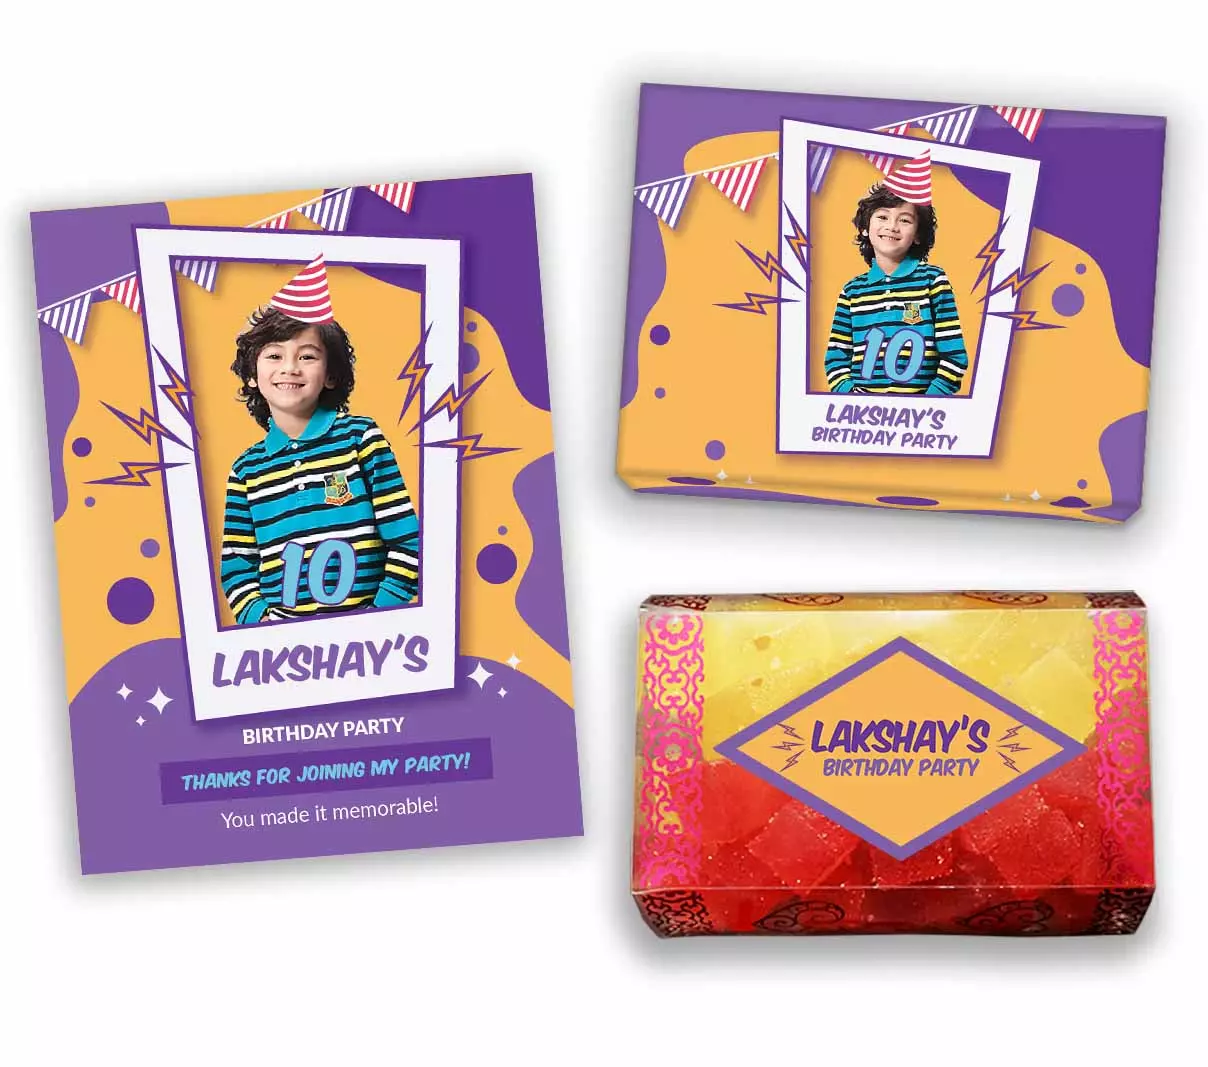 Customized Message Cards with Return Gifts for Kids Birthday